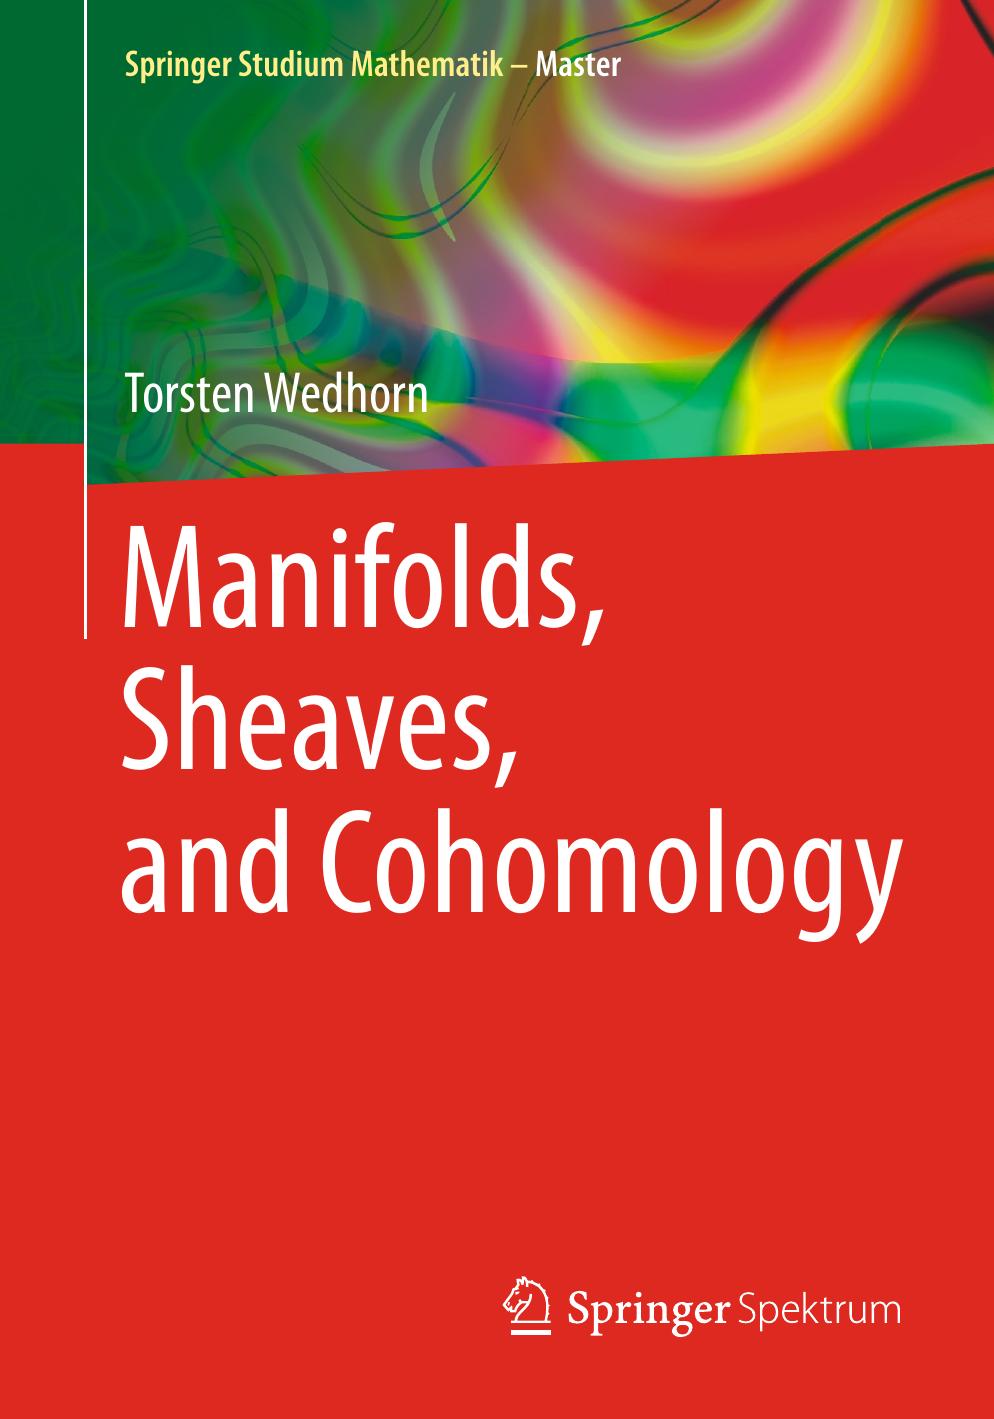 Manifolds, Sheaves, and Cohomology by Torsten Wedhorn